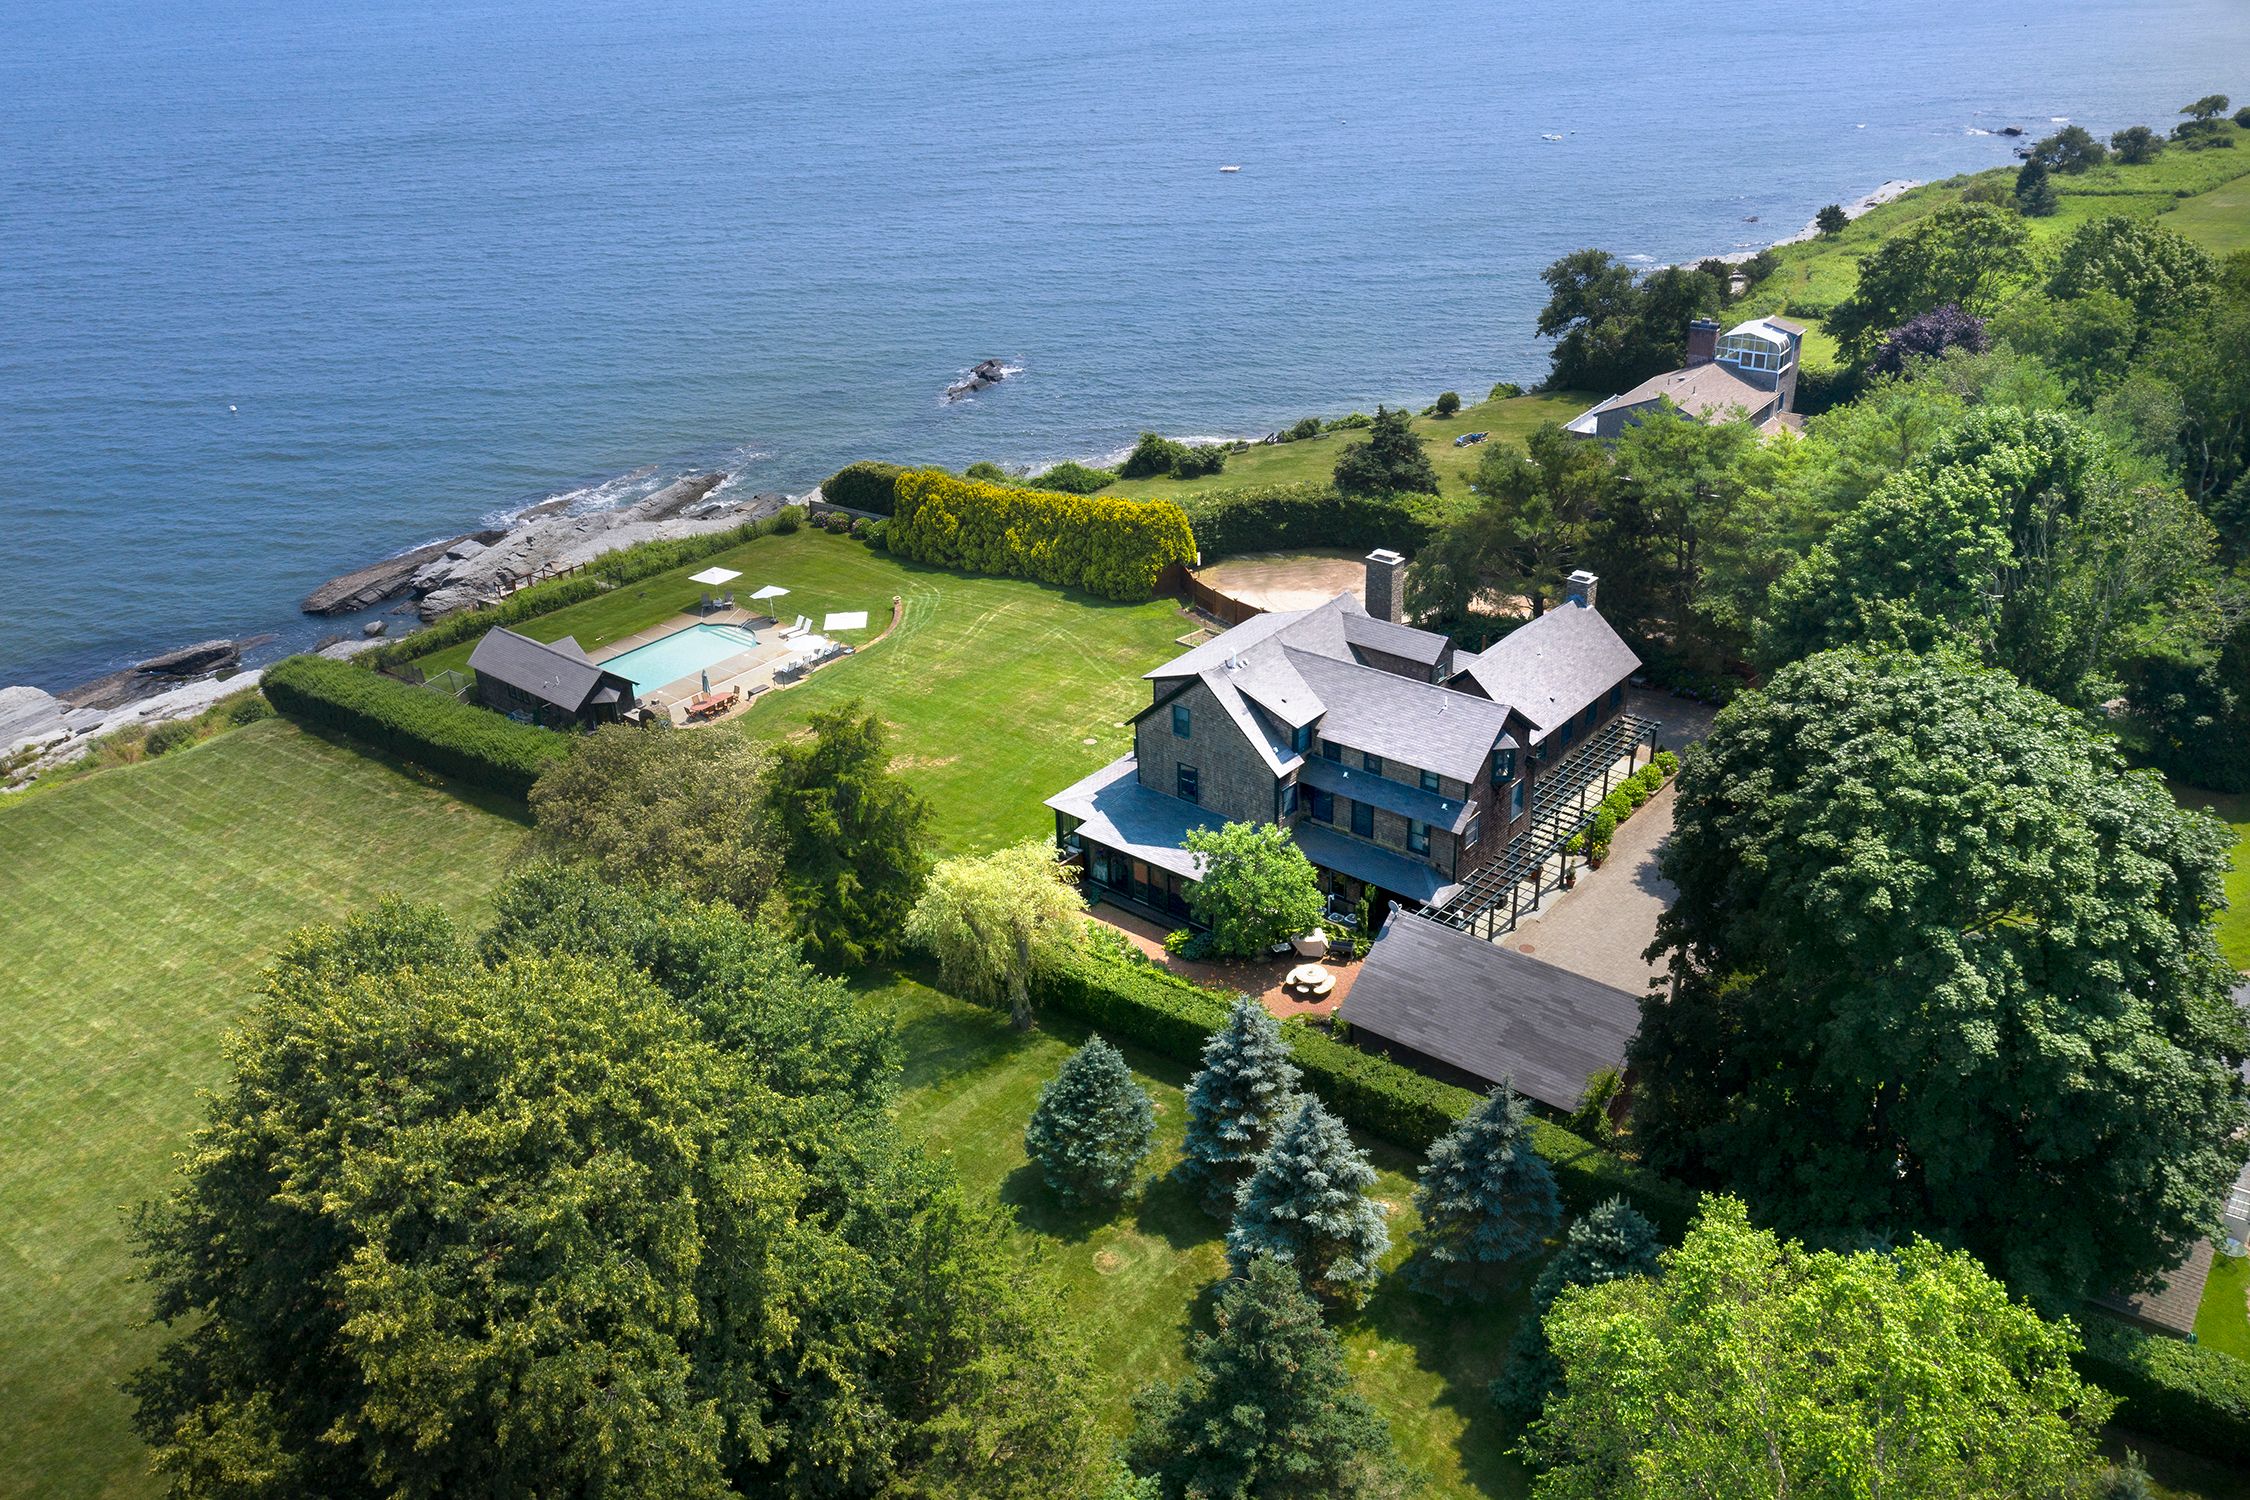 ERIC KIRTON OF LILA DELMAN COMPASS SELLS WATERFRONT INDIAN AVENUE COMPOUND FOR $5,700,000, MARKING HIGHEST SALE IN MIDDLETOWN THIS YEAR.*